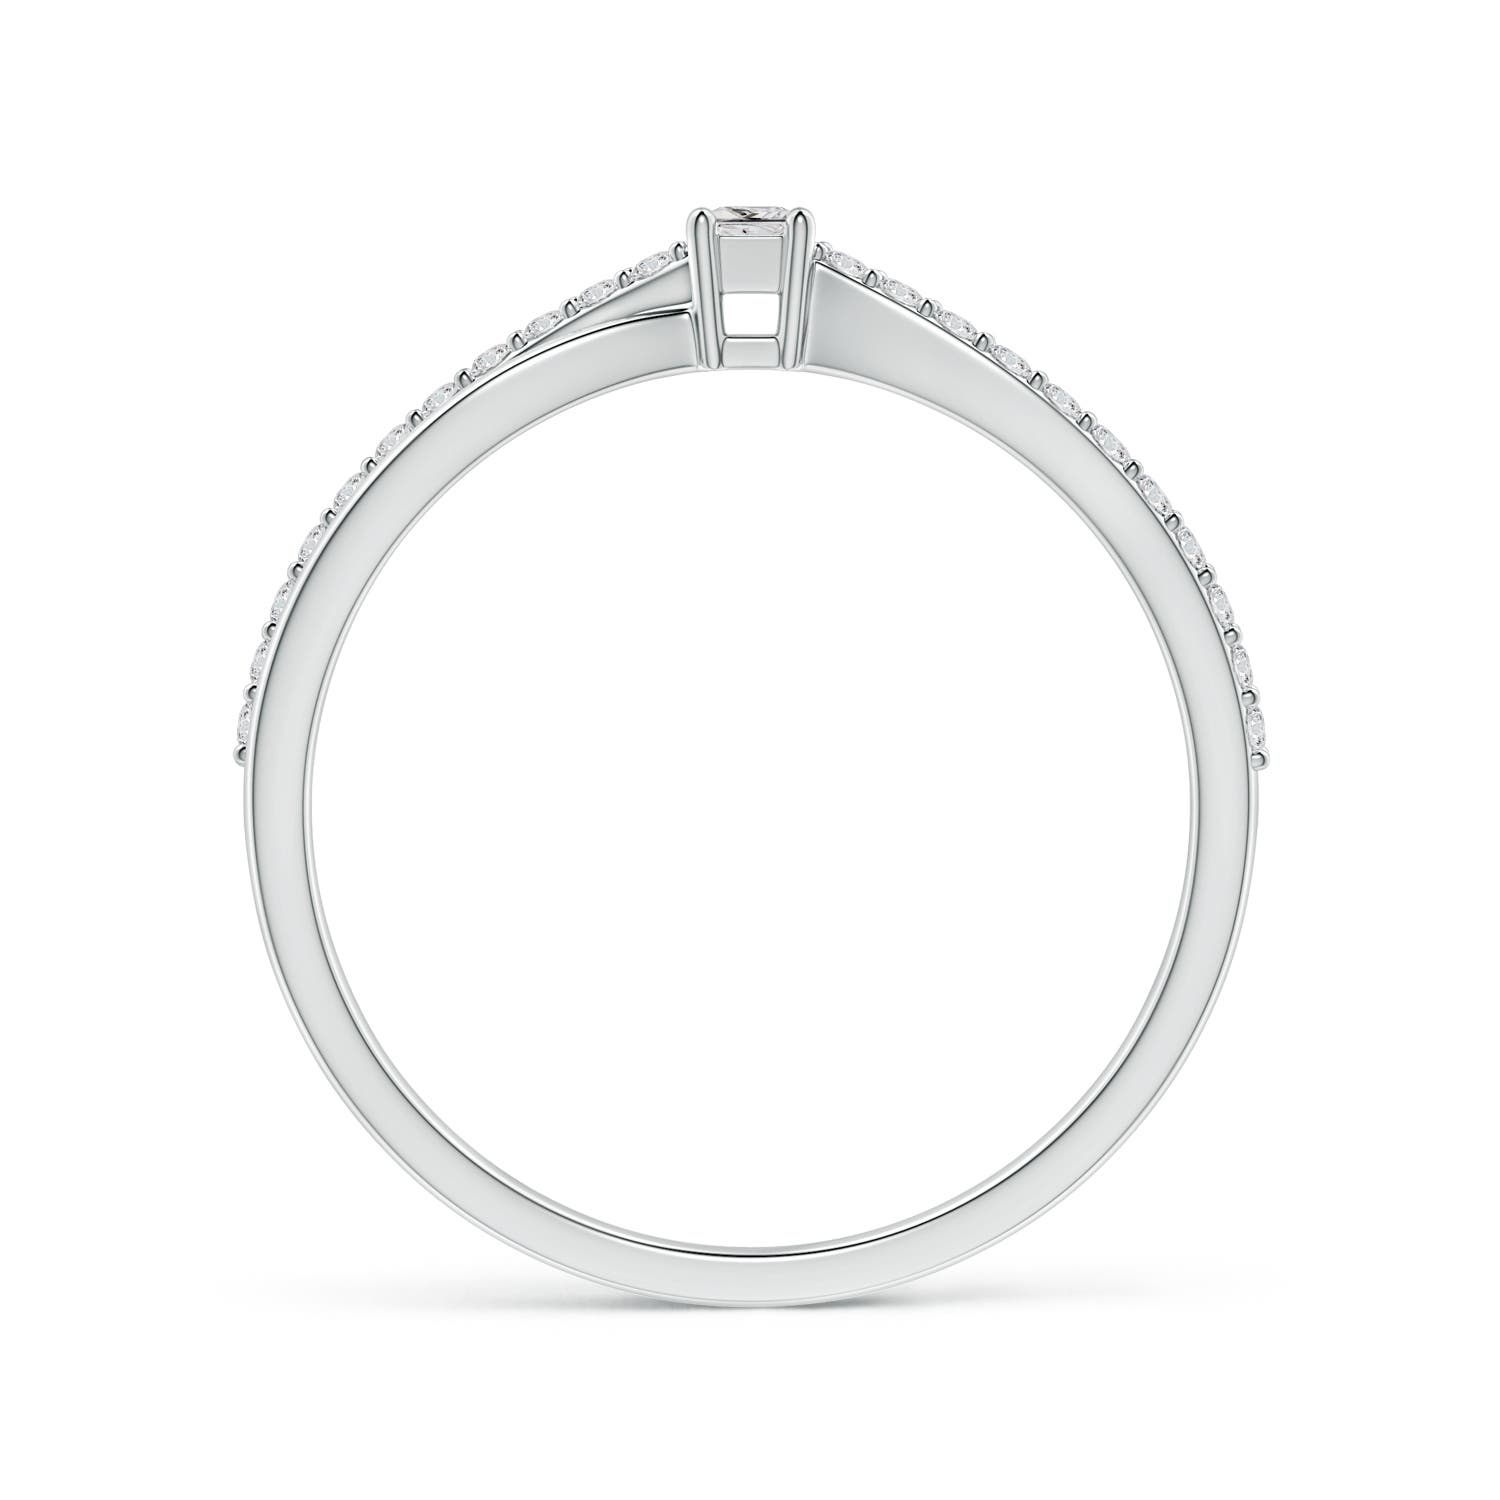 H, SI2 / 0.19 CT / 14 KT White Gold